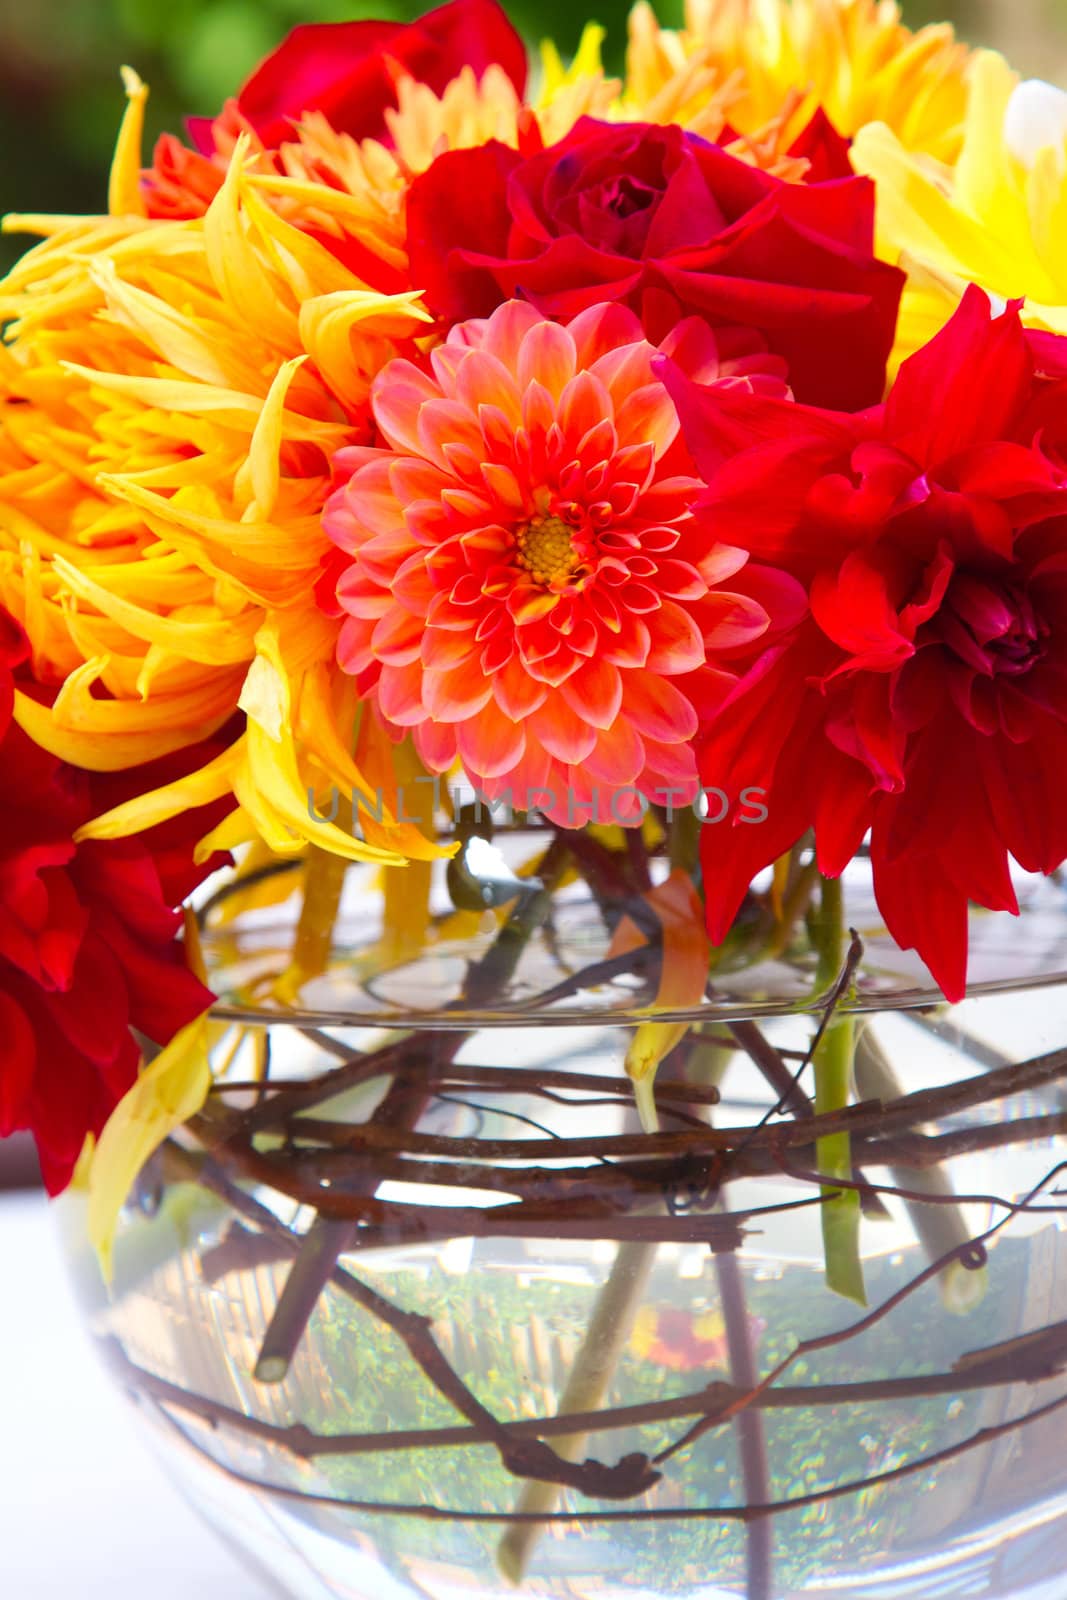 Wedding decor at a ceremony and reception with beautiful red and yellow flowers.